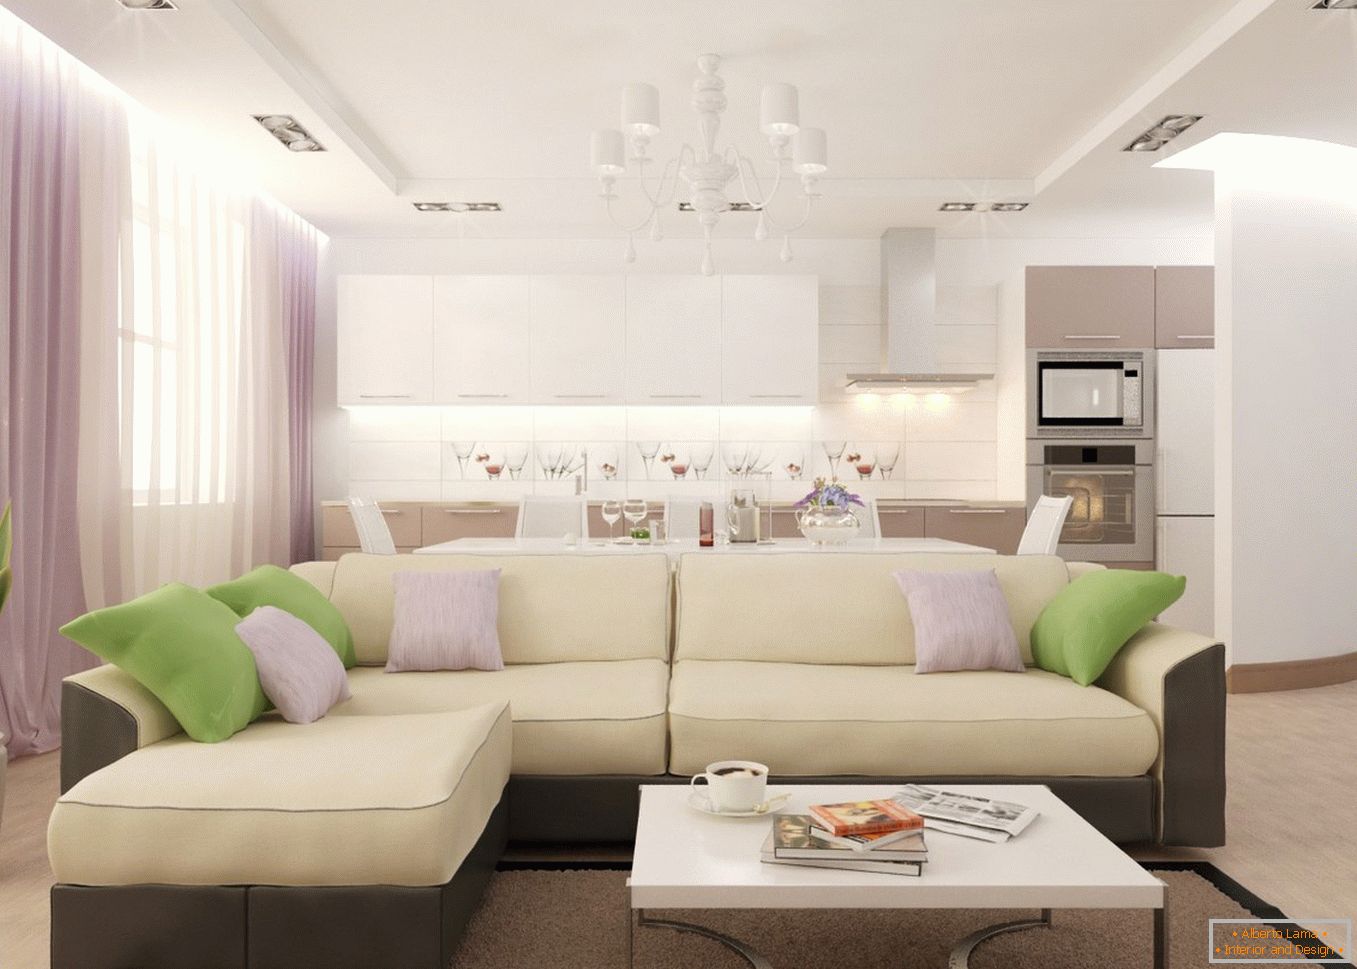 A wide sofa in the kitchen-living room